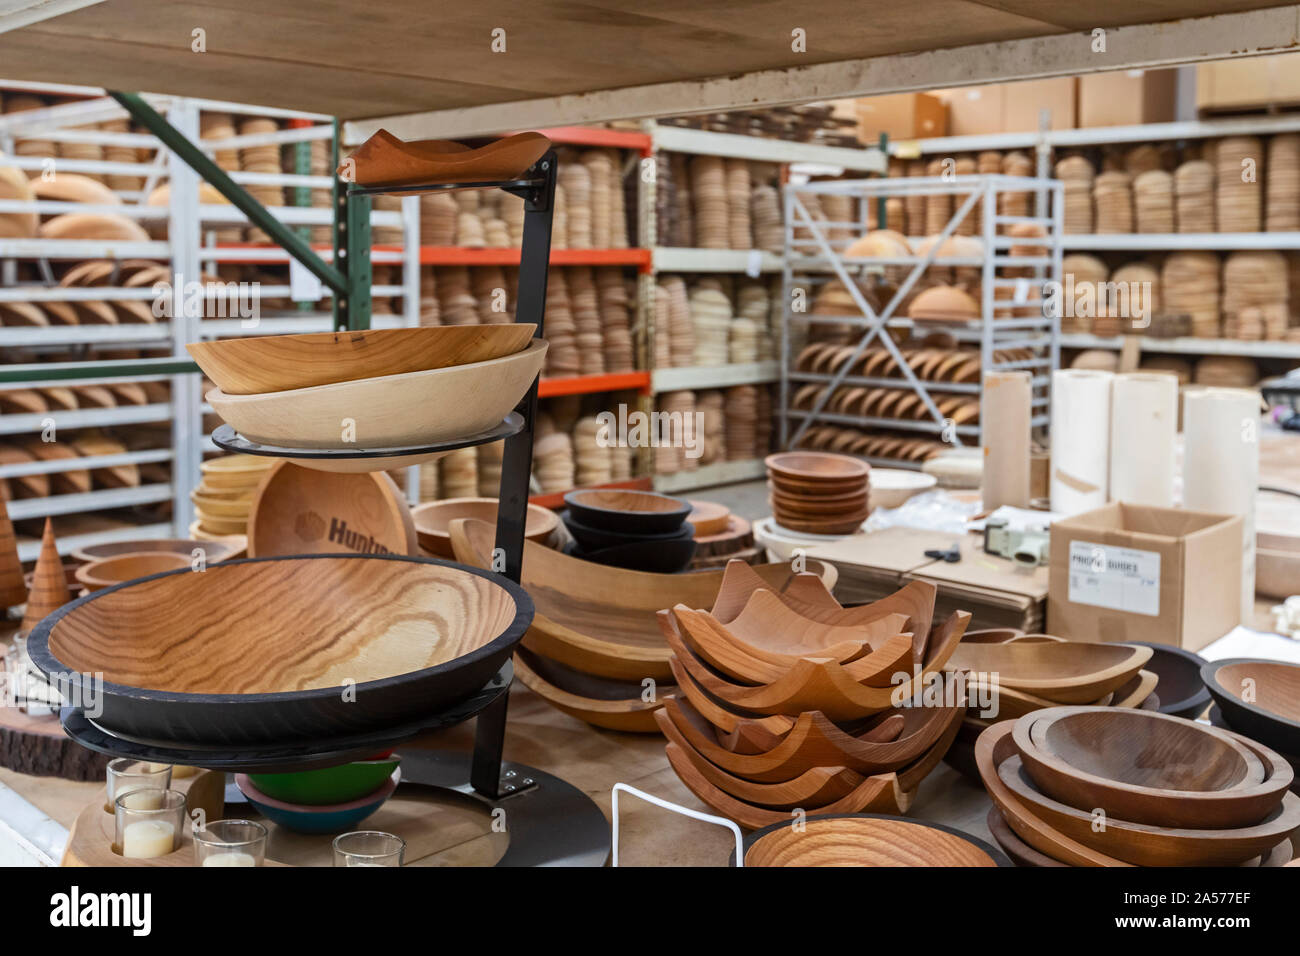 Holland, Michigan - Wood bowls at the Holland Bowl Mill, which turns logs into bowls and other wood products. Stock Photo